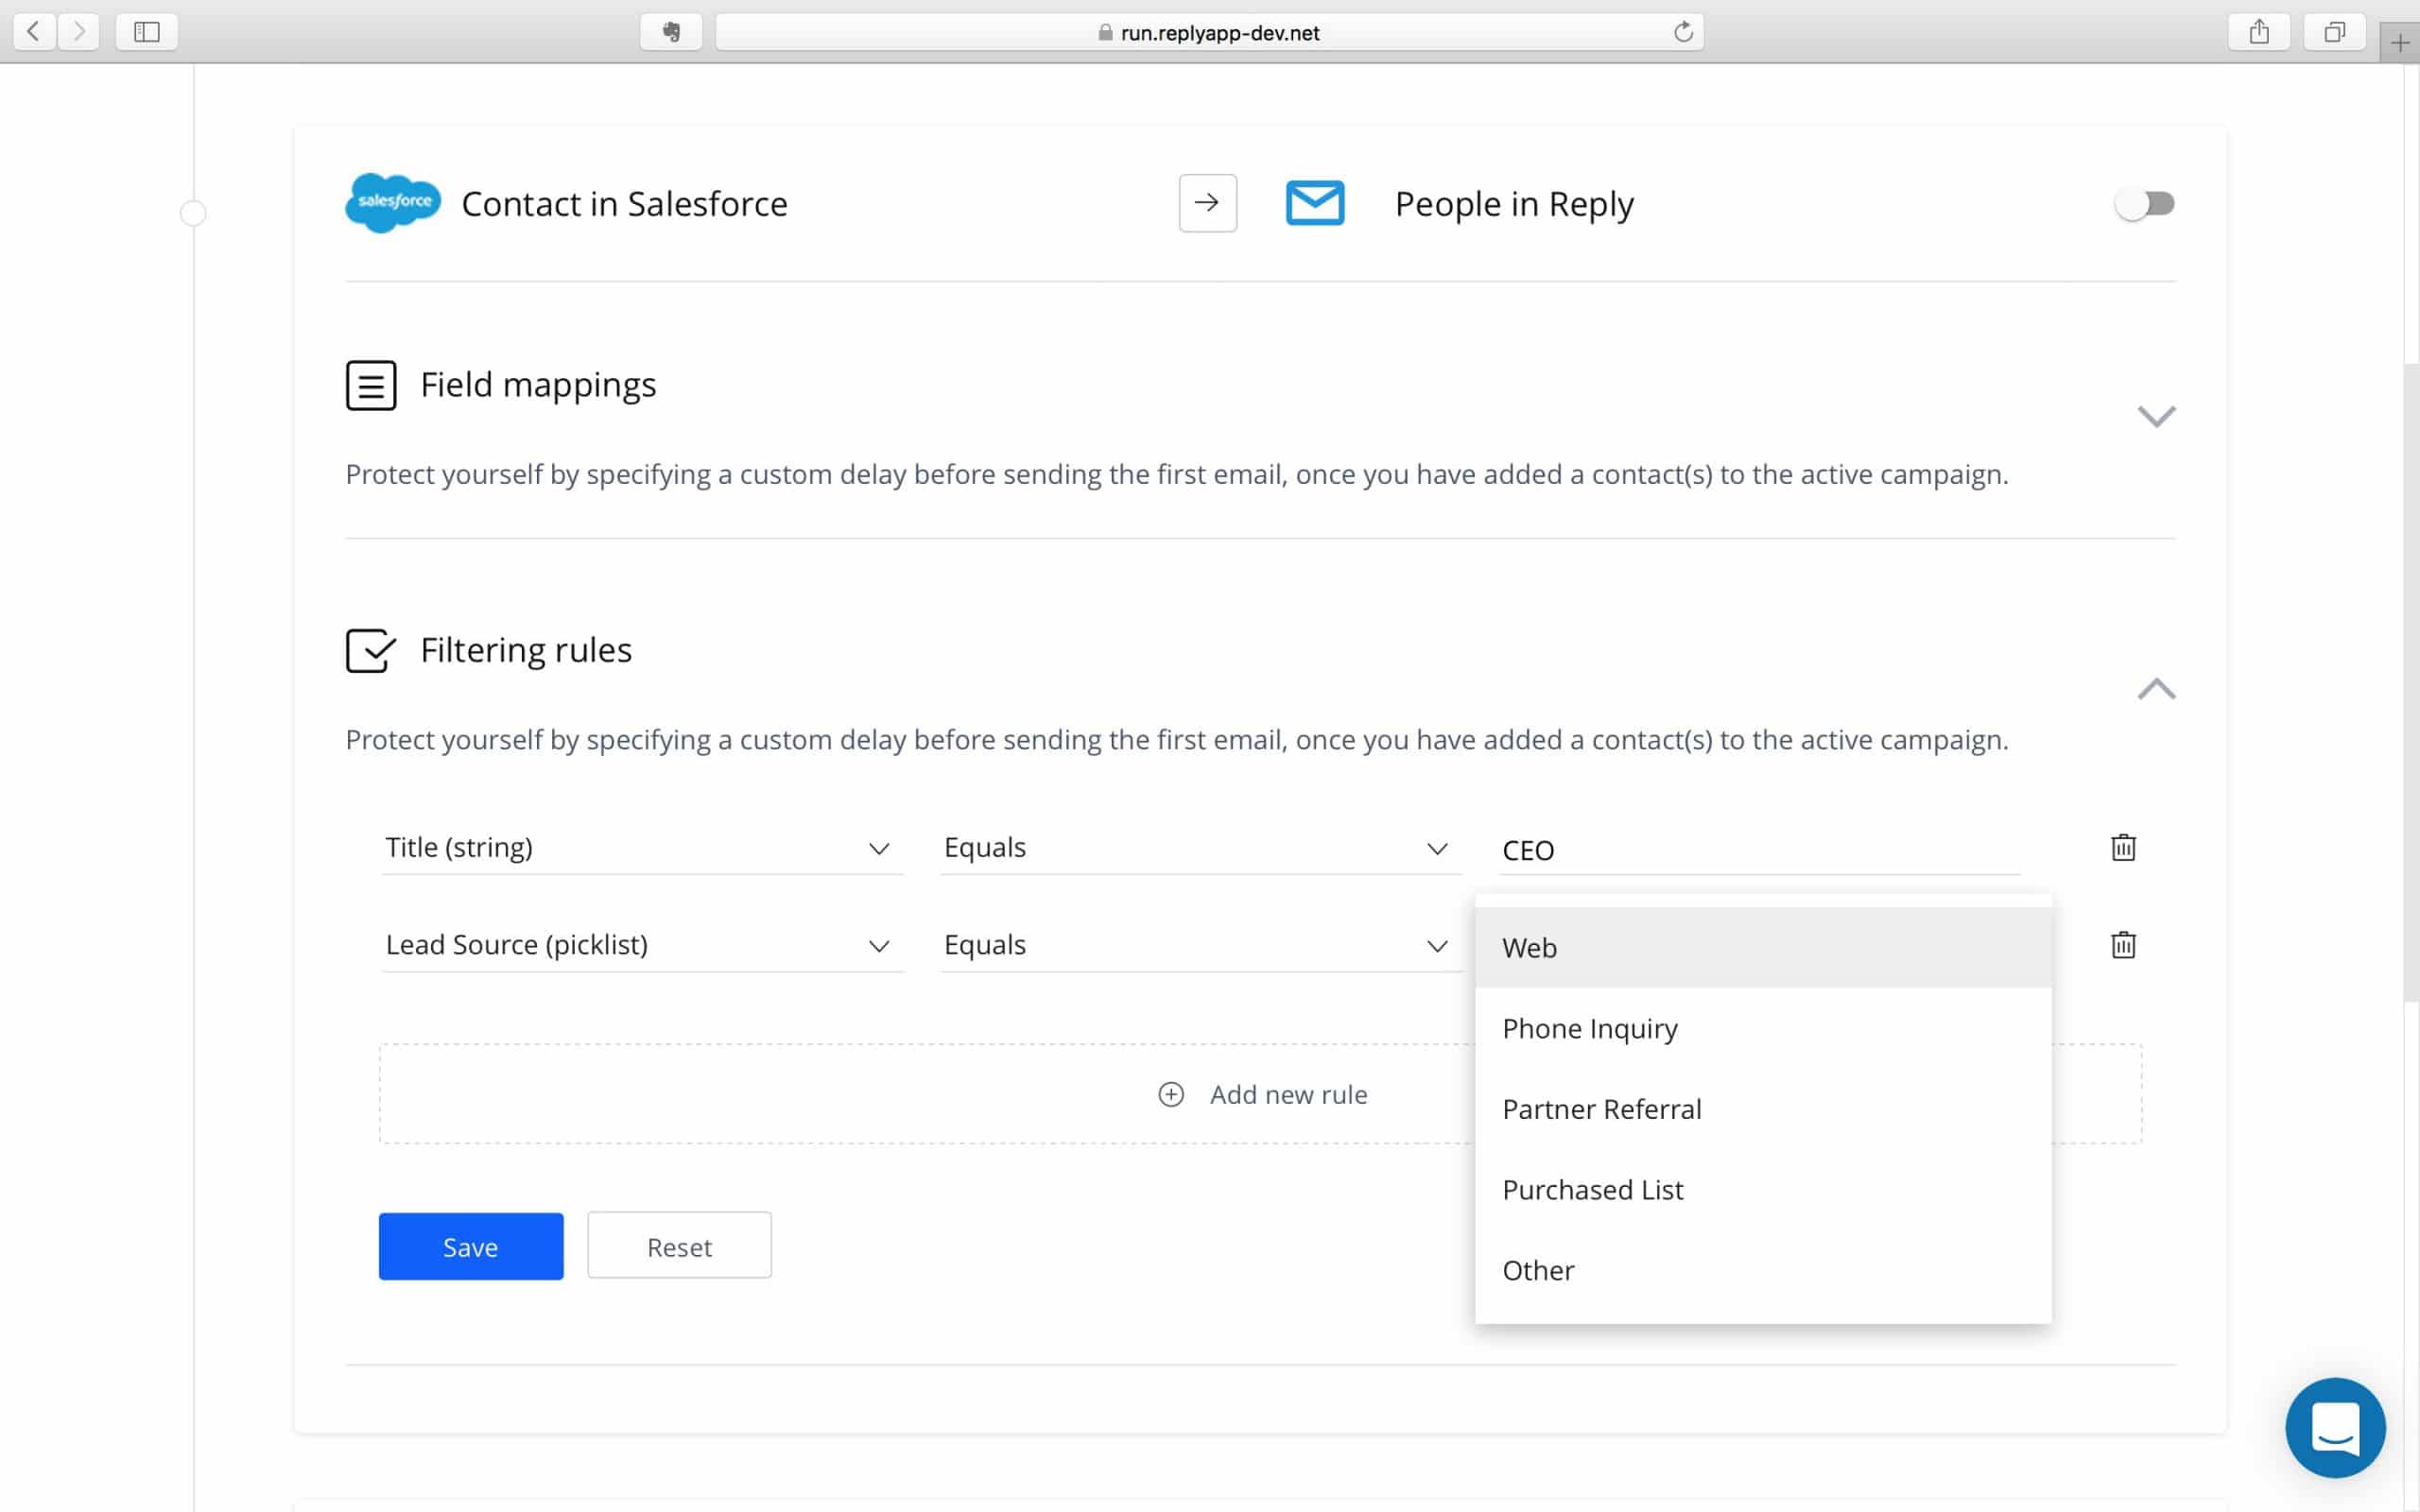 How to add a new filtering rule for SalesForce Reply integration